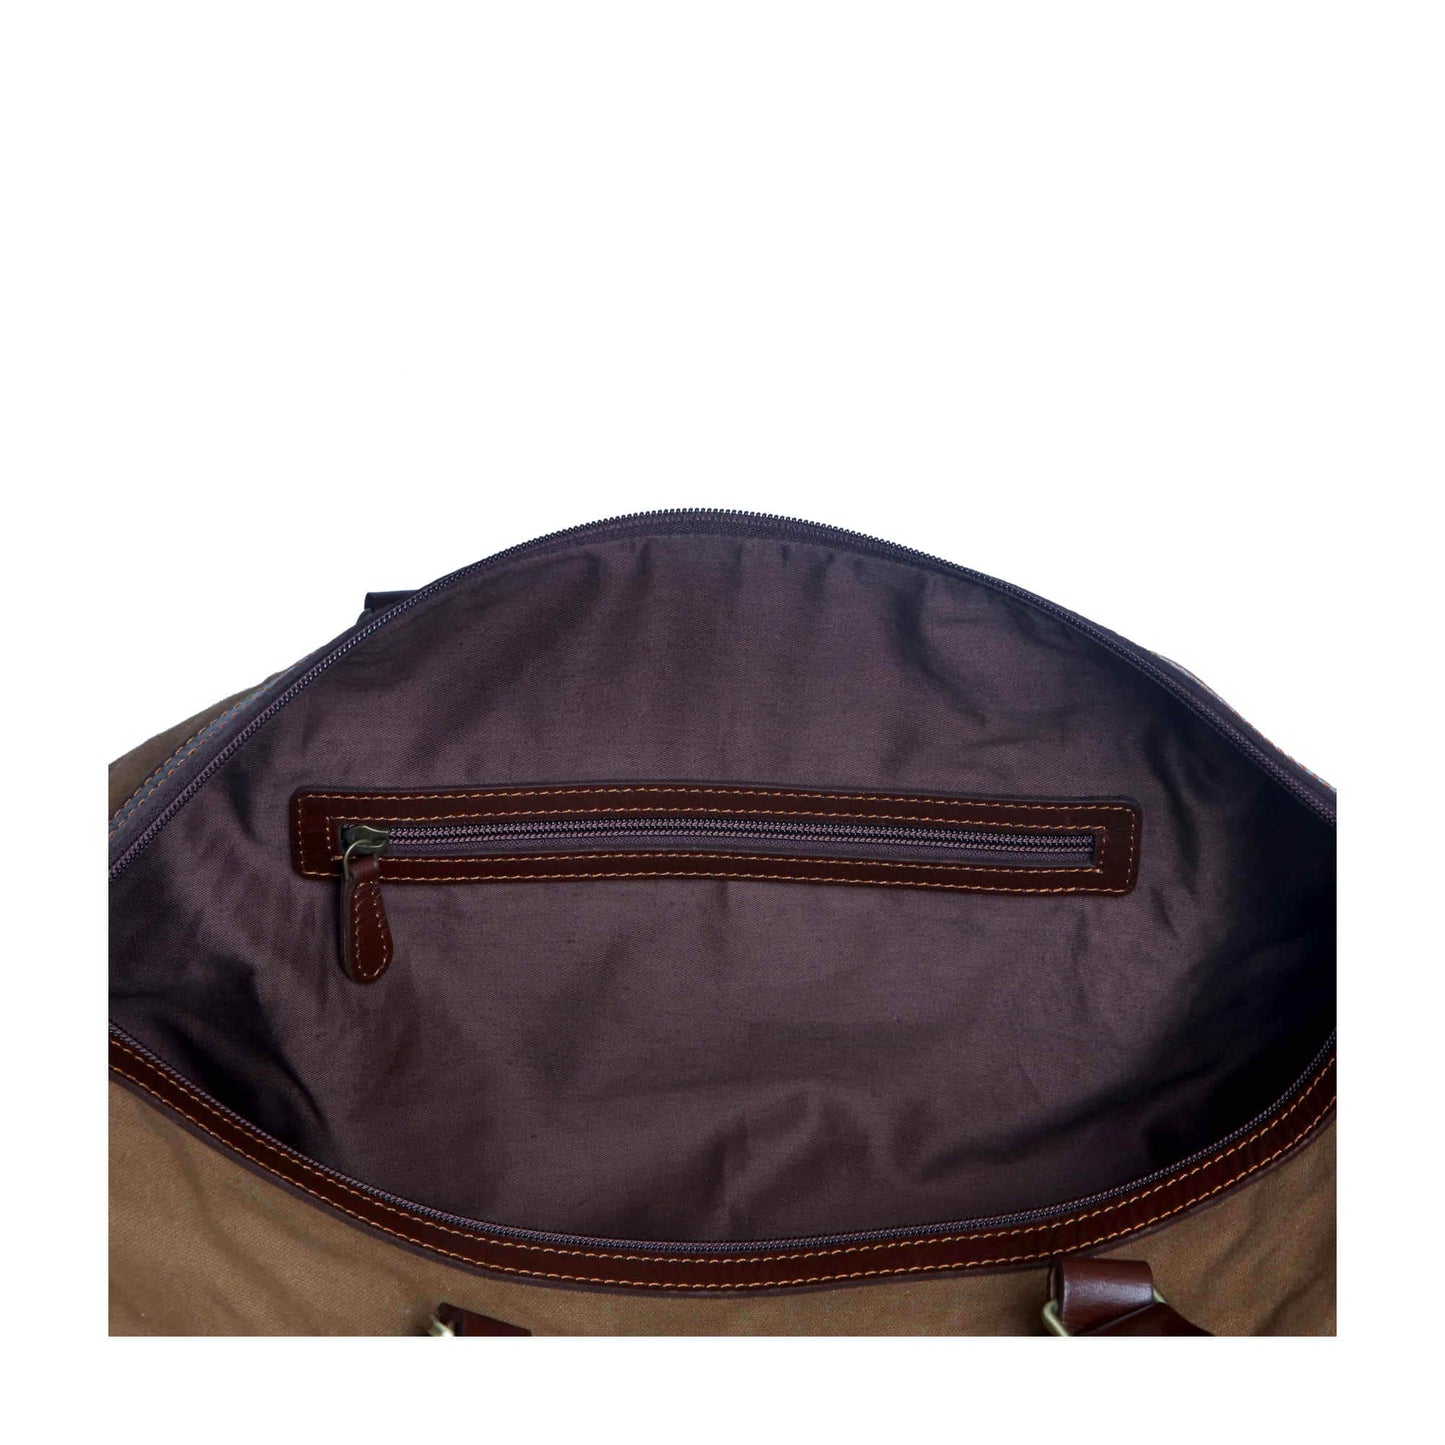 Style n Craft 397101 Duffle Bag in Waterproof Brown Canvas & Full Grain Leather - Internal Back Wall View Showing the Zipper Pocket